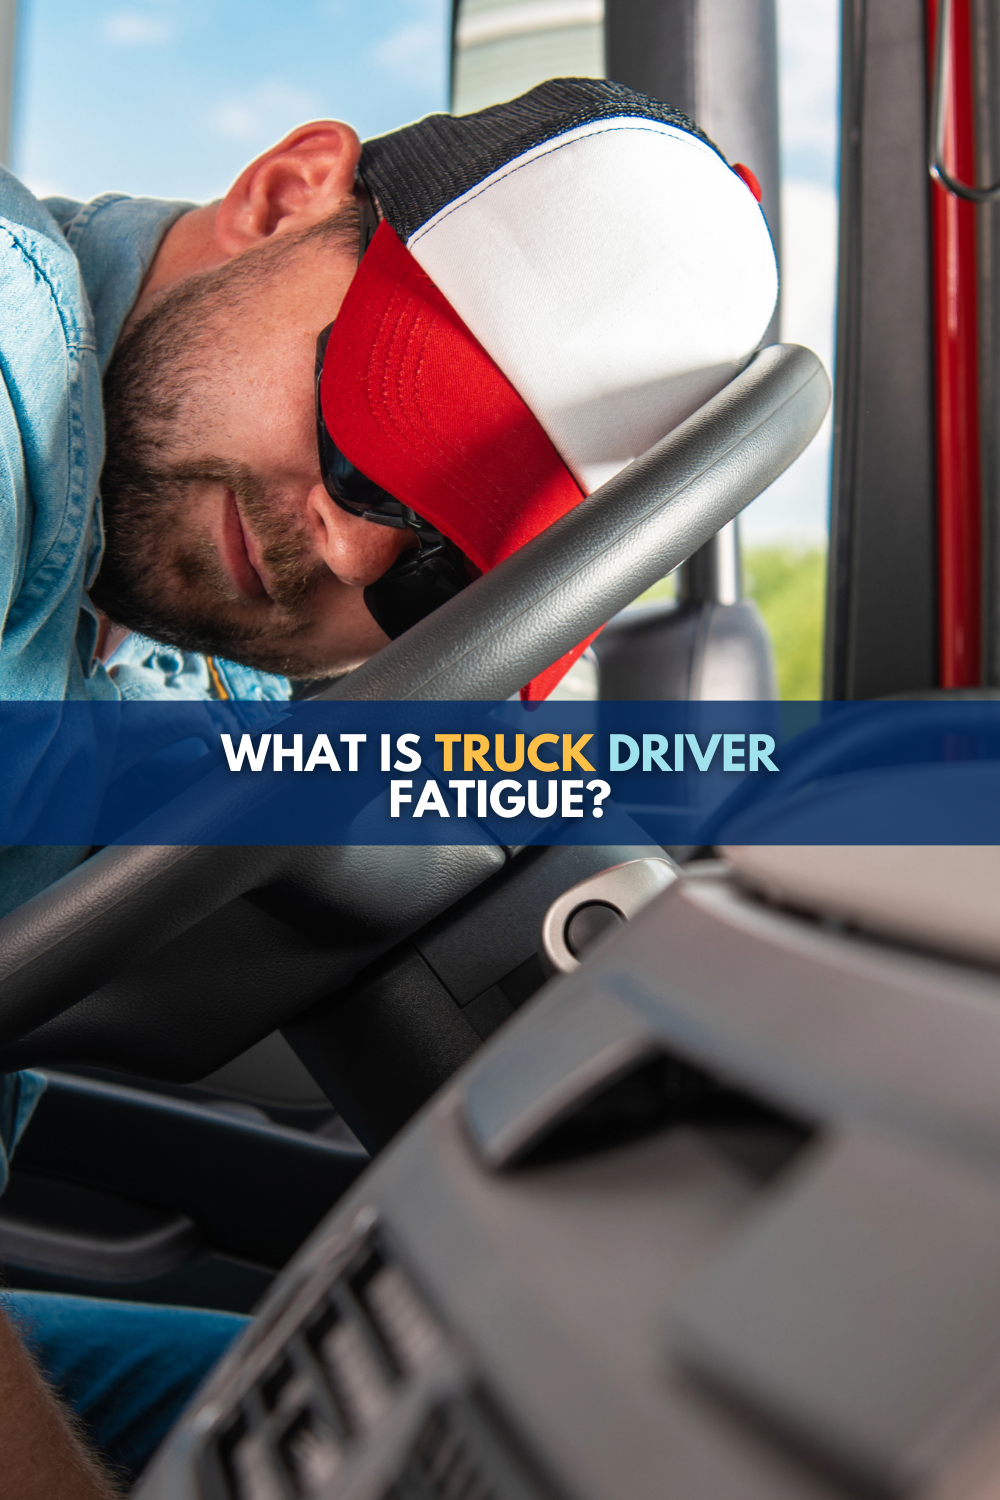 Truck Driver Fatigue: What Is It and How To Prevent It